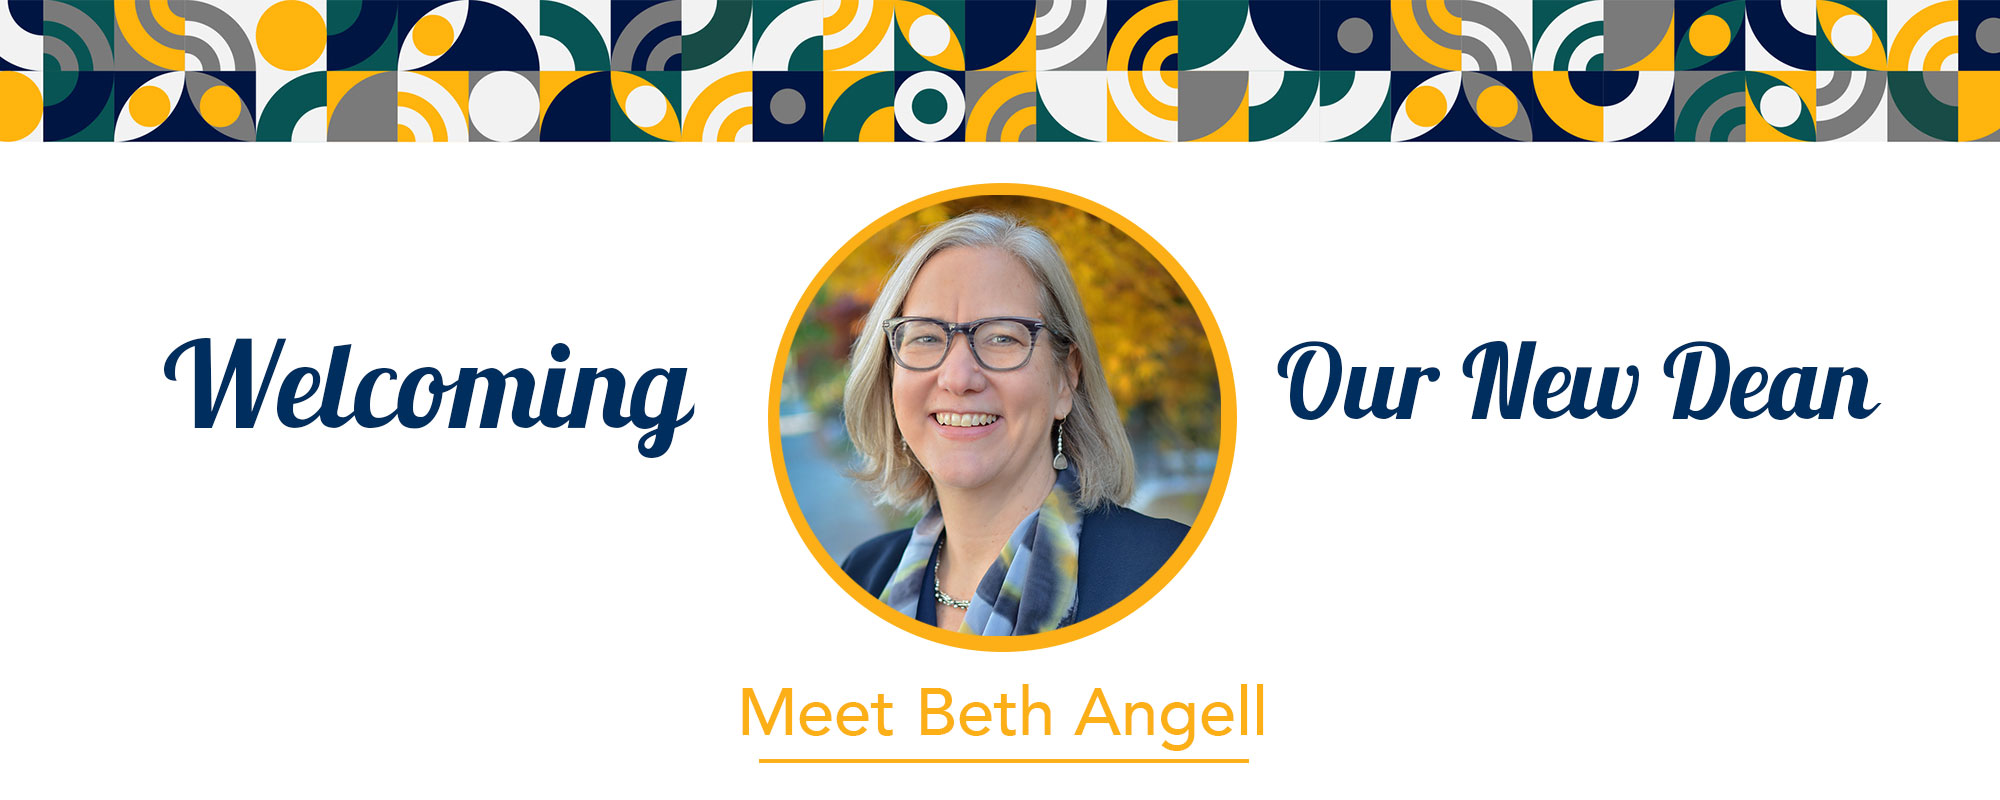 Welcoming Our New Dean - Meet Beth Angell